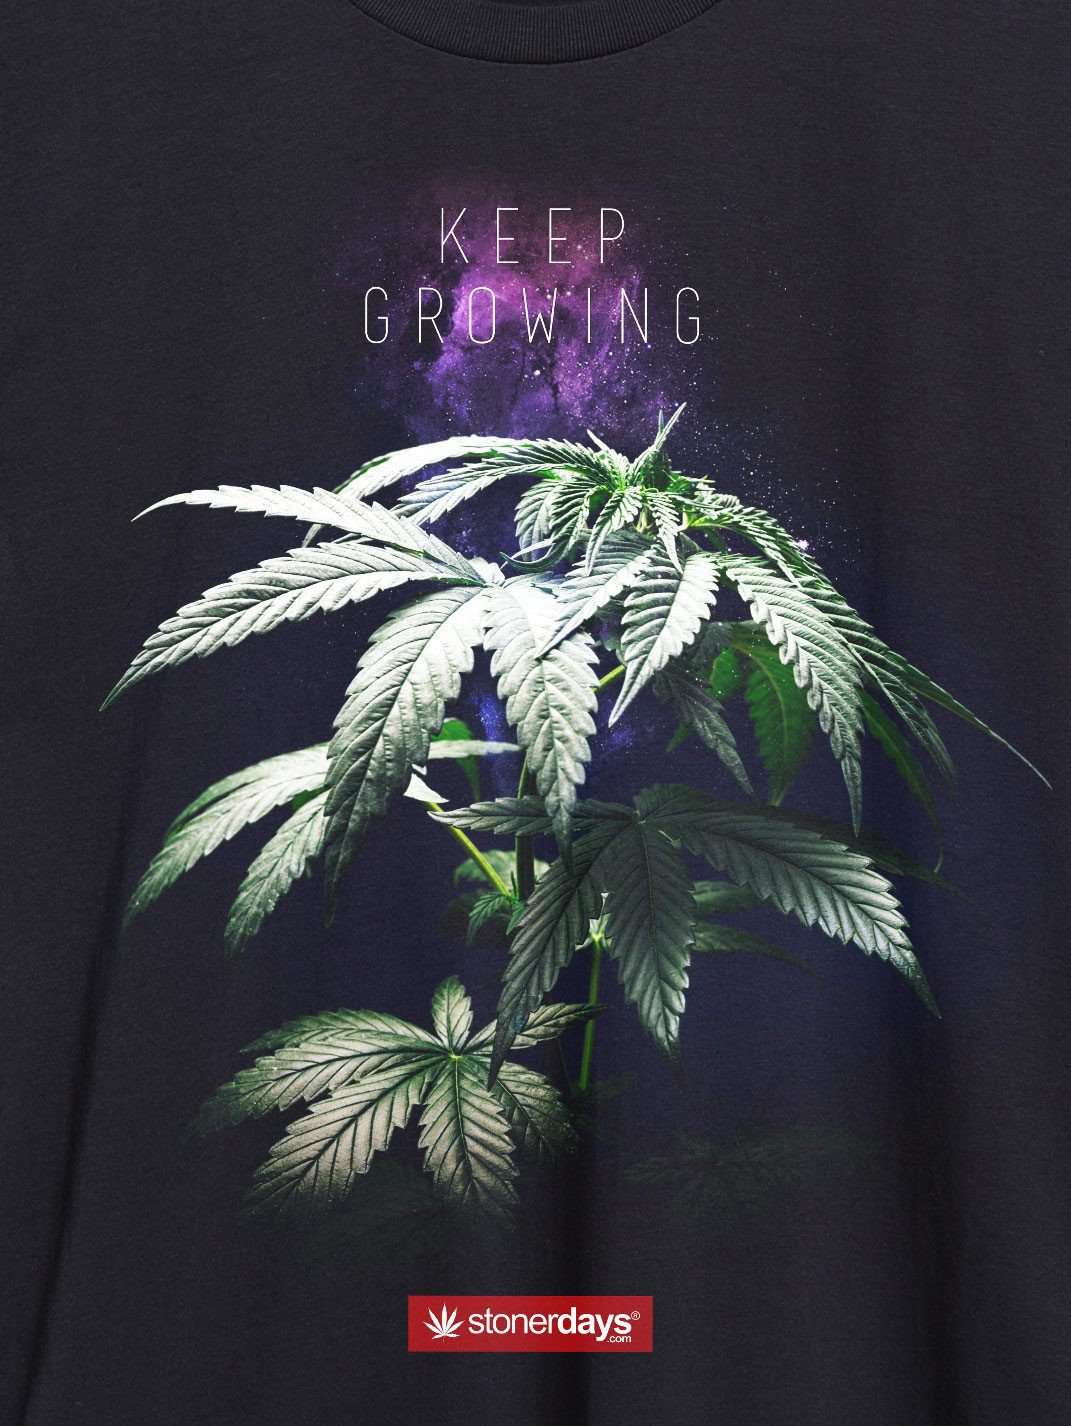 StonerDays Men's Keep Growing Tank in black, close-up of cannabis leaf graphic design